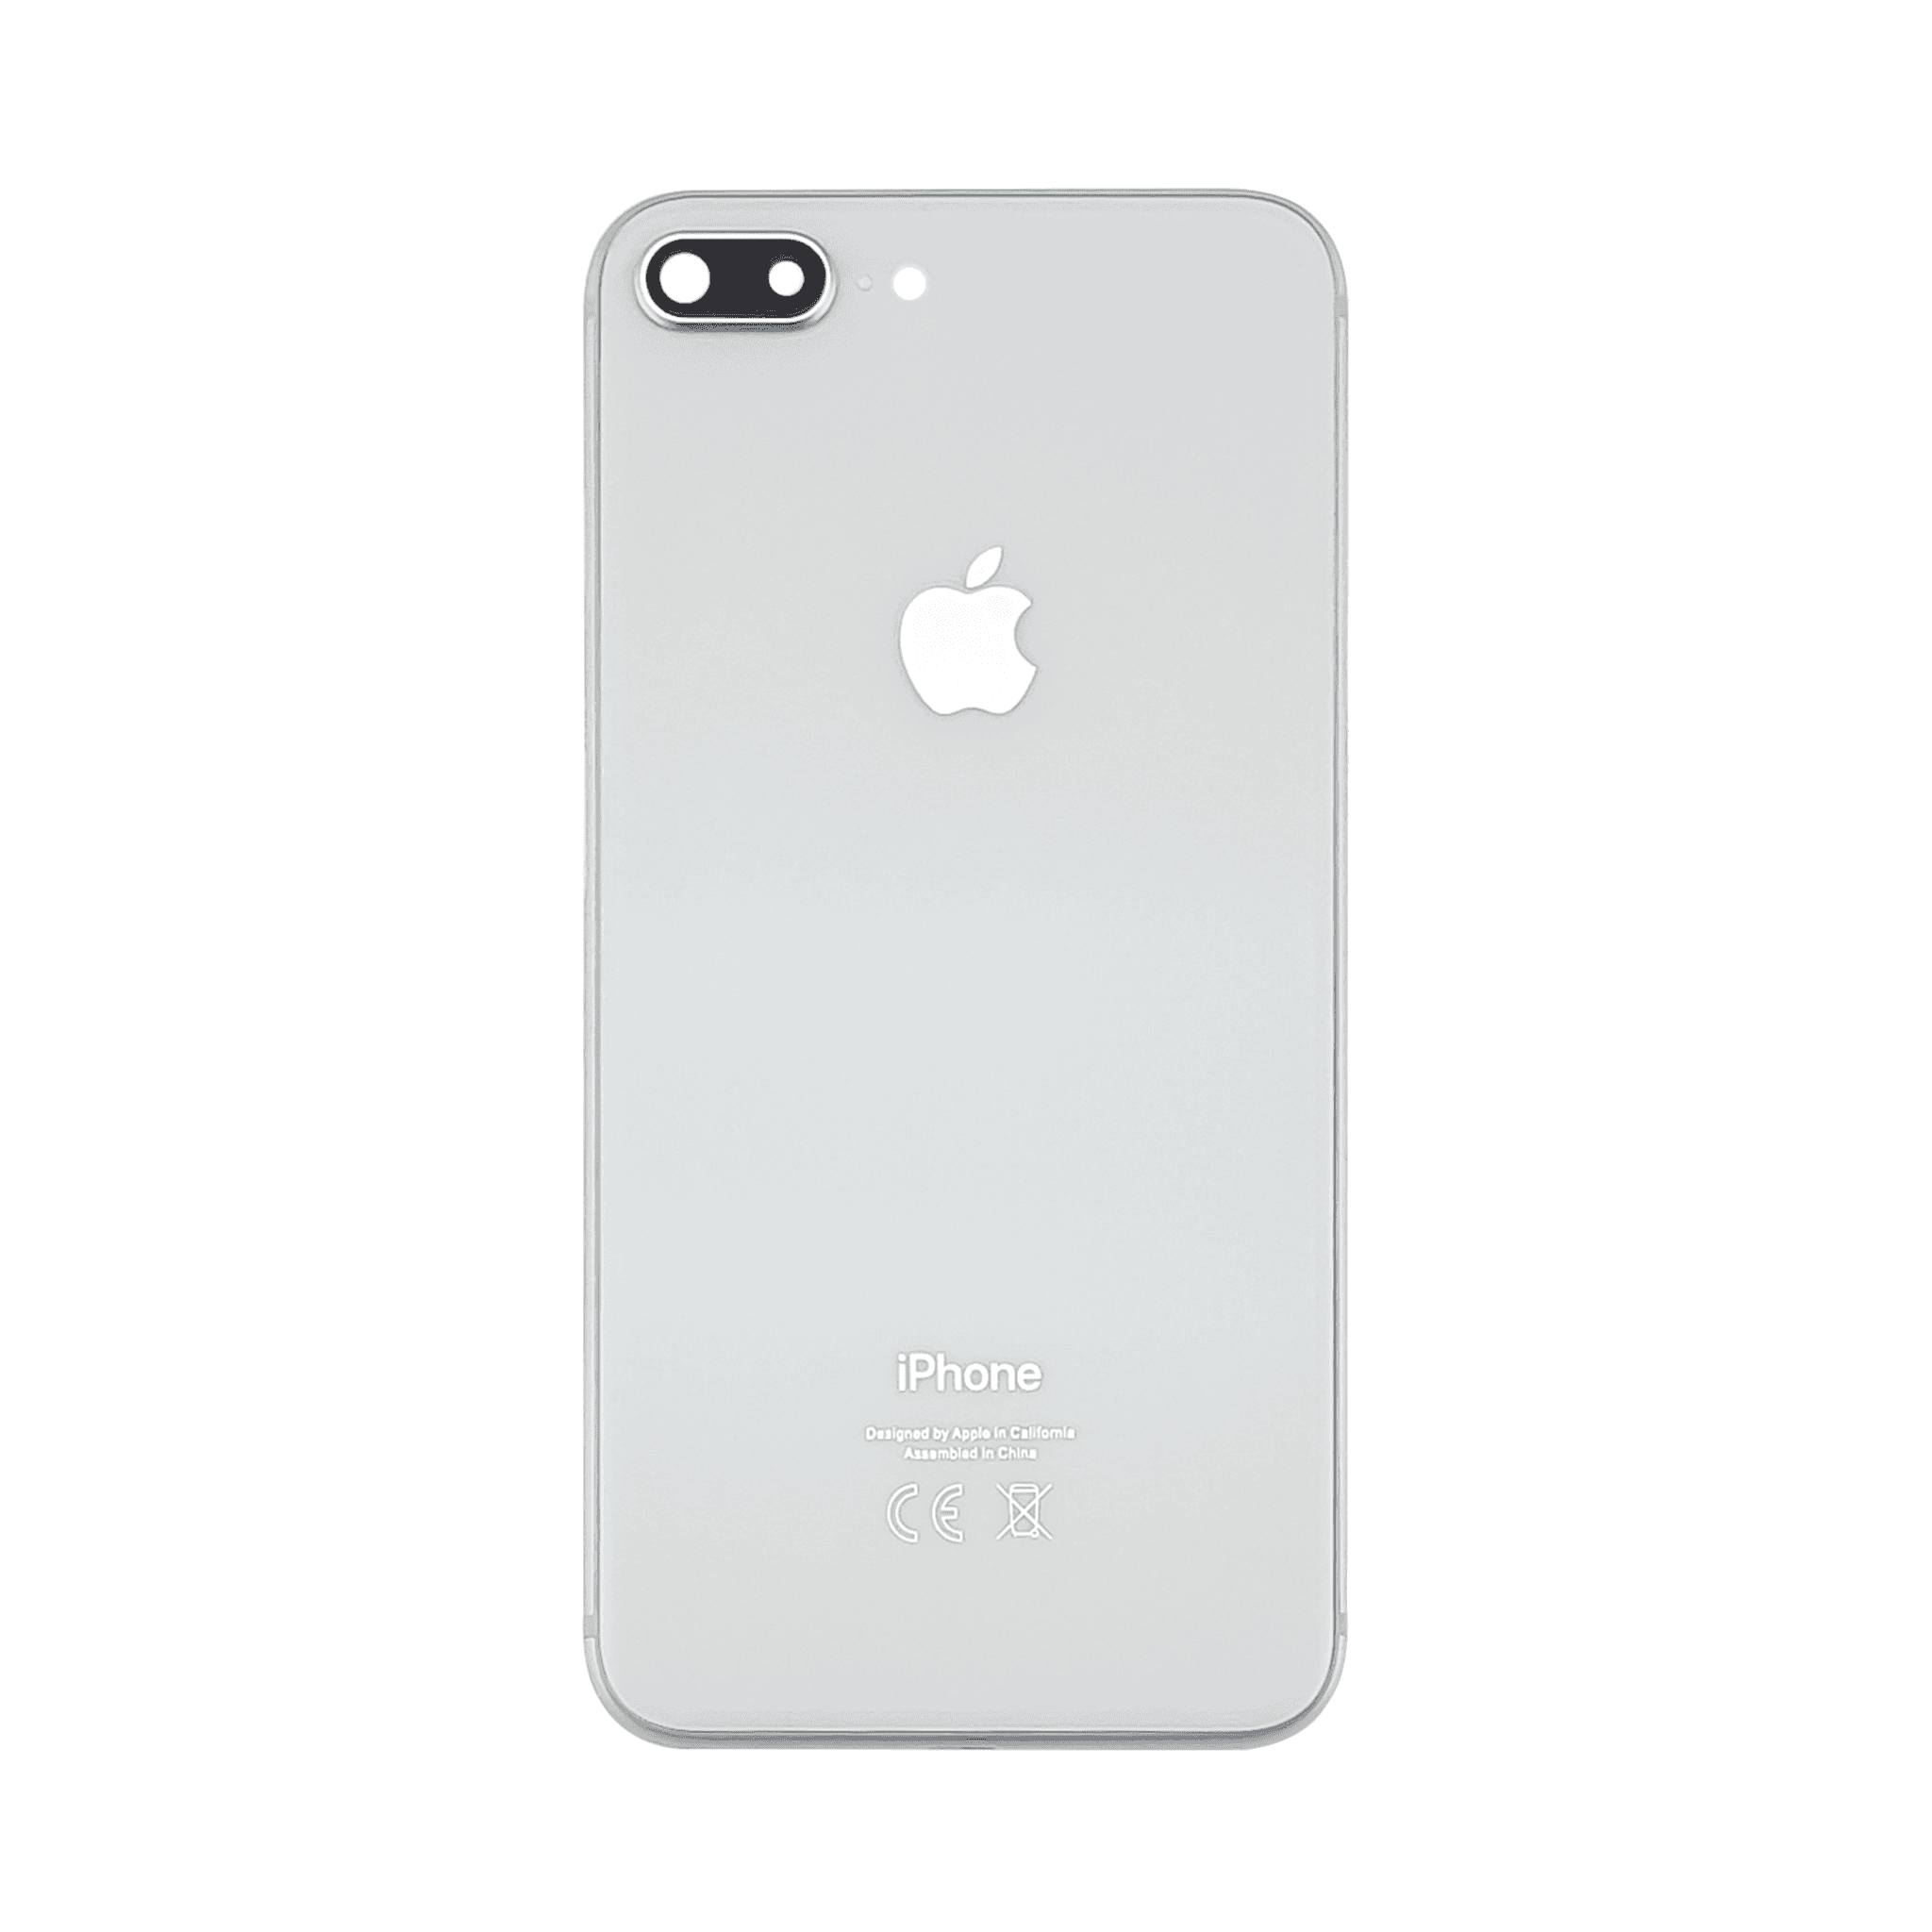 Body + battery cover iPhone 8 plus white